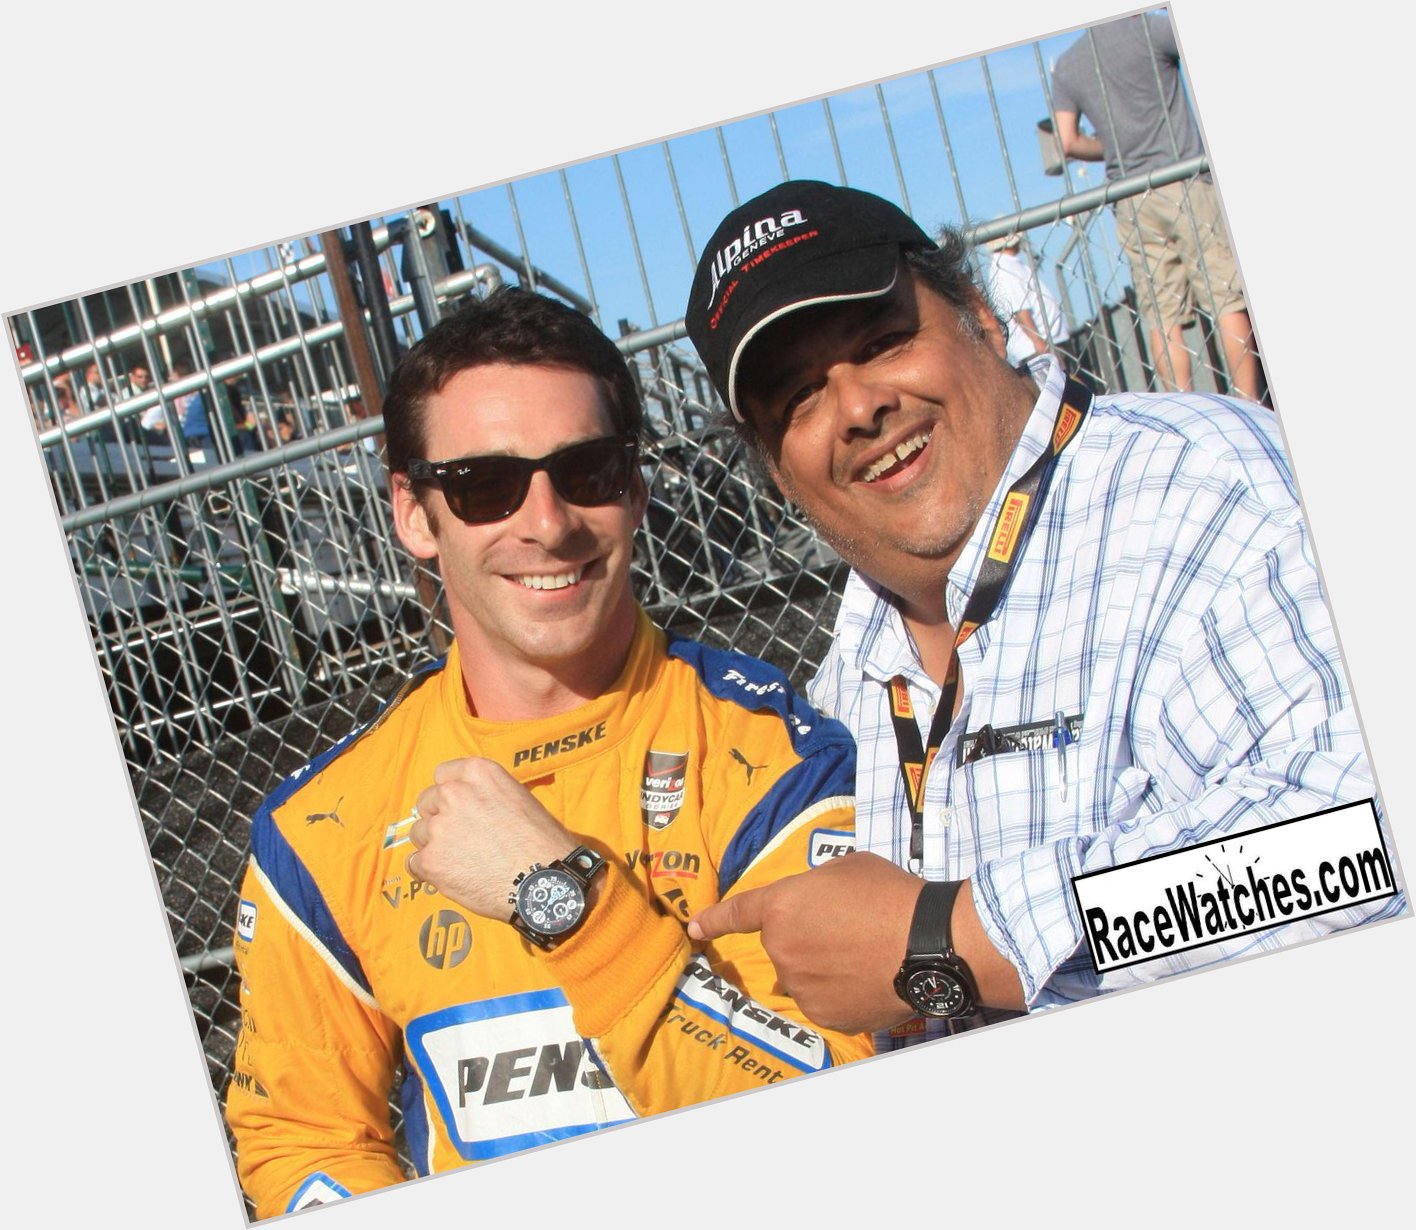 Happy Birthday/Bon anniversaire to our favorite Indycar driver, Simon Pagenaud! 